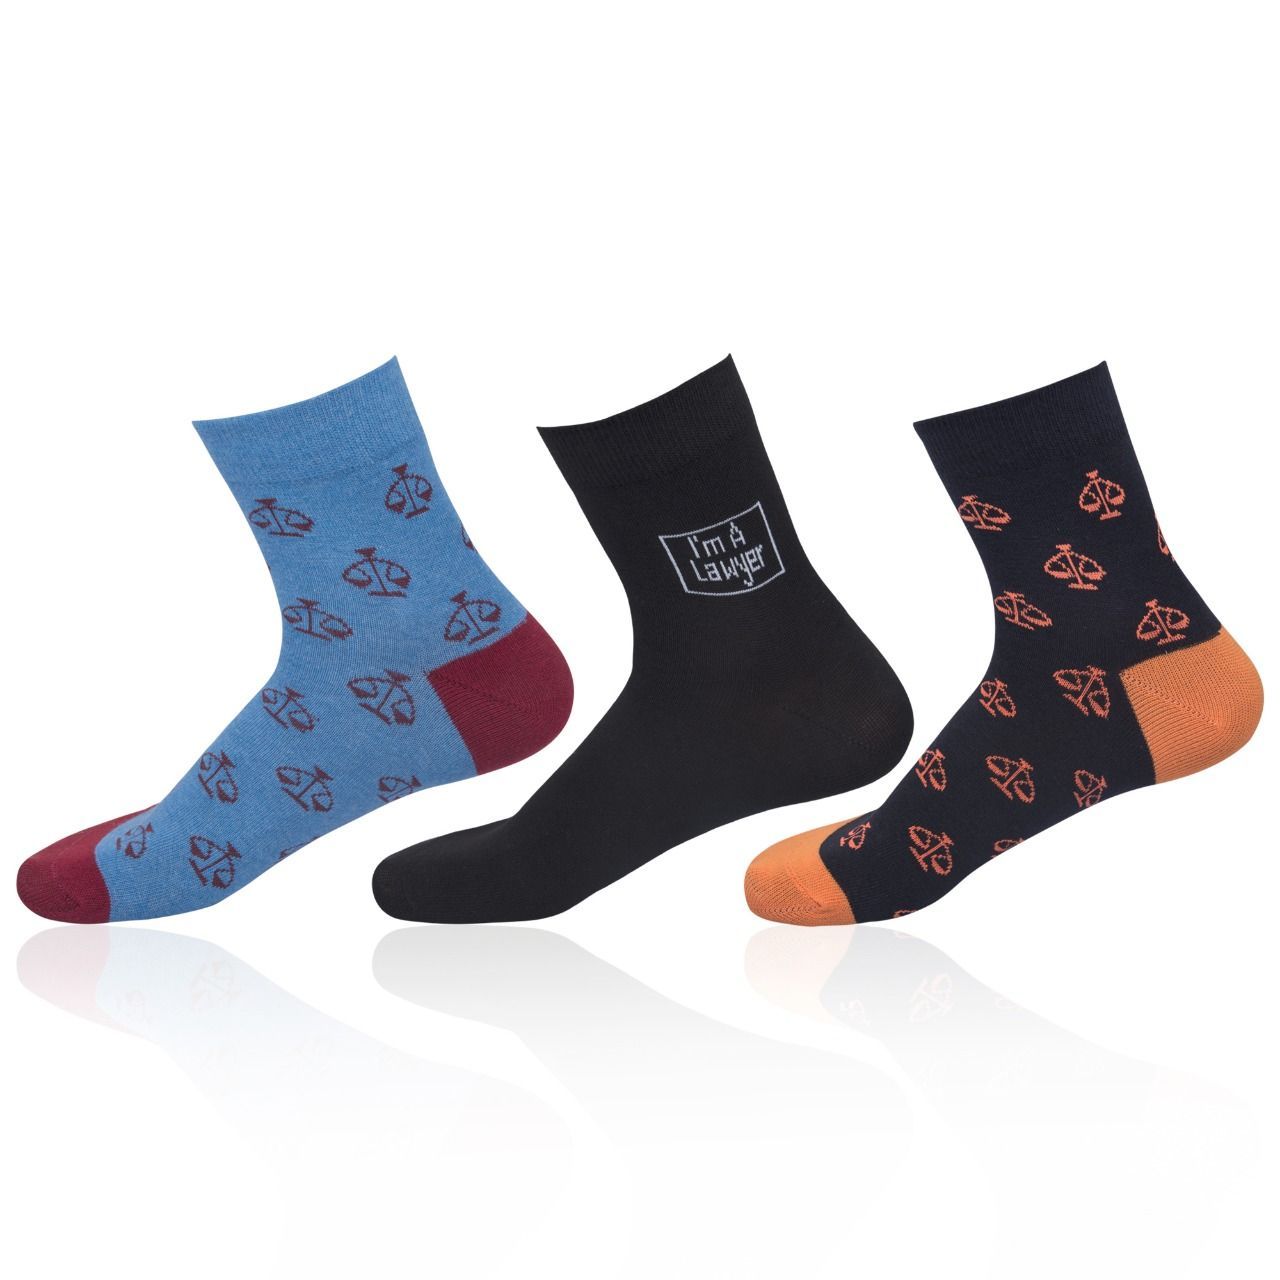 The Sassy Solicitor Colourful Socks, Ankle Length, Set of 3